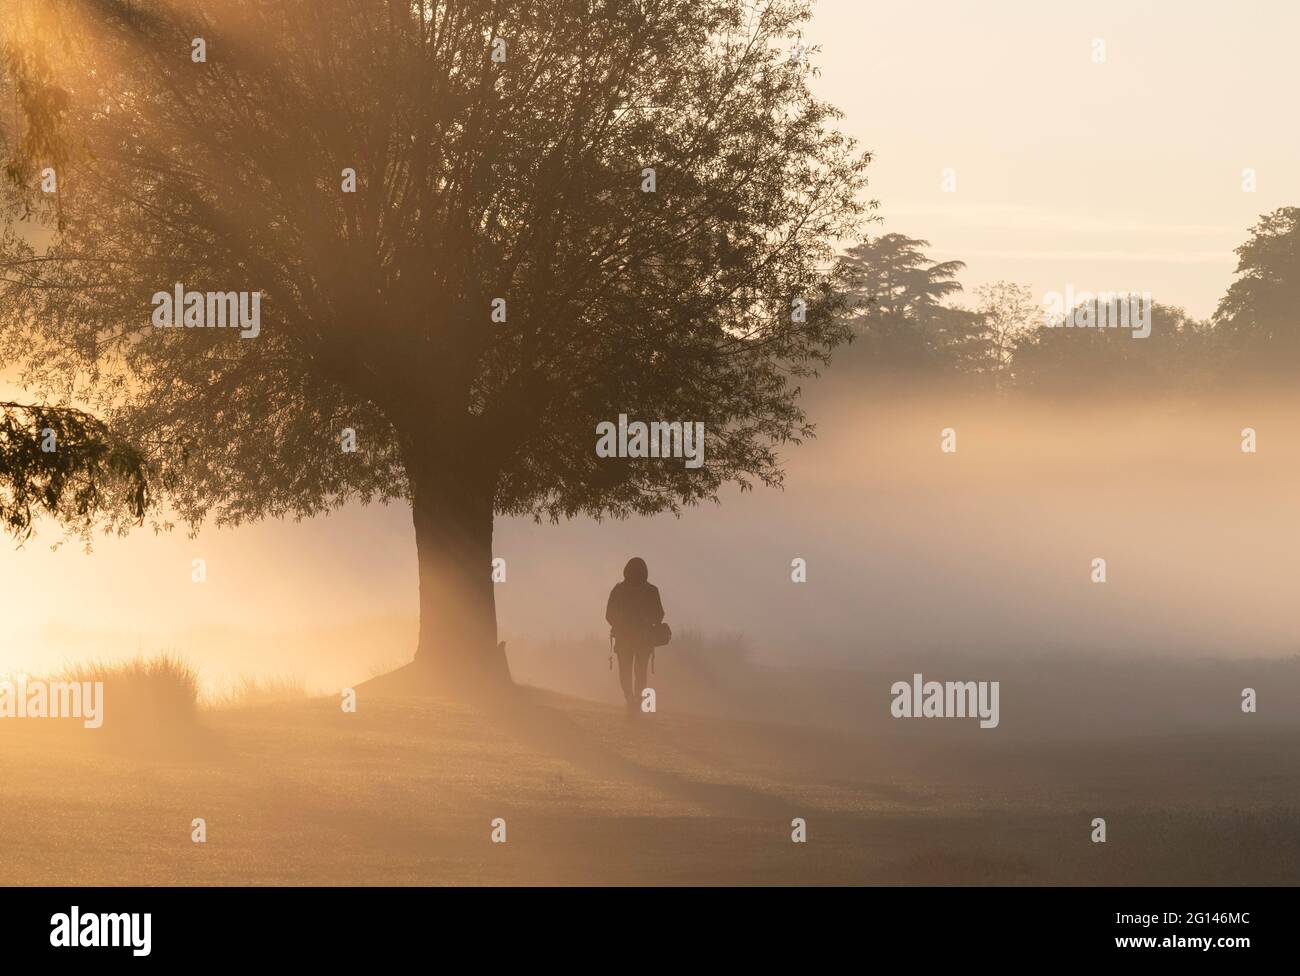 Sunrise creates a silhouette of a person walking by a tree in early morning mist Stock Photo